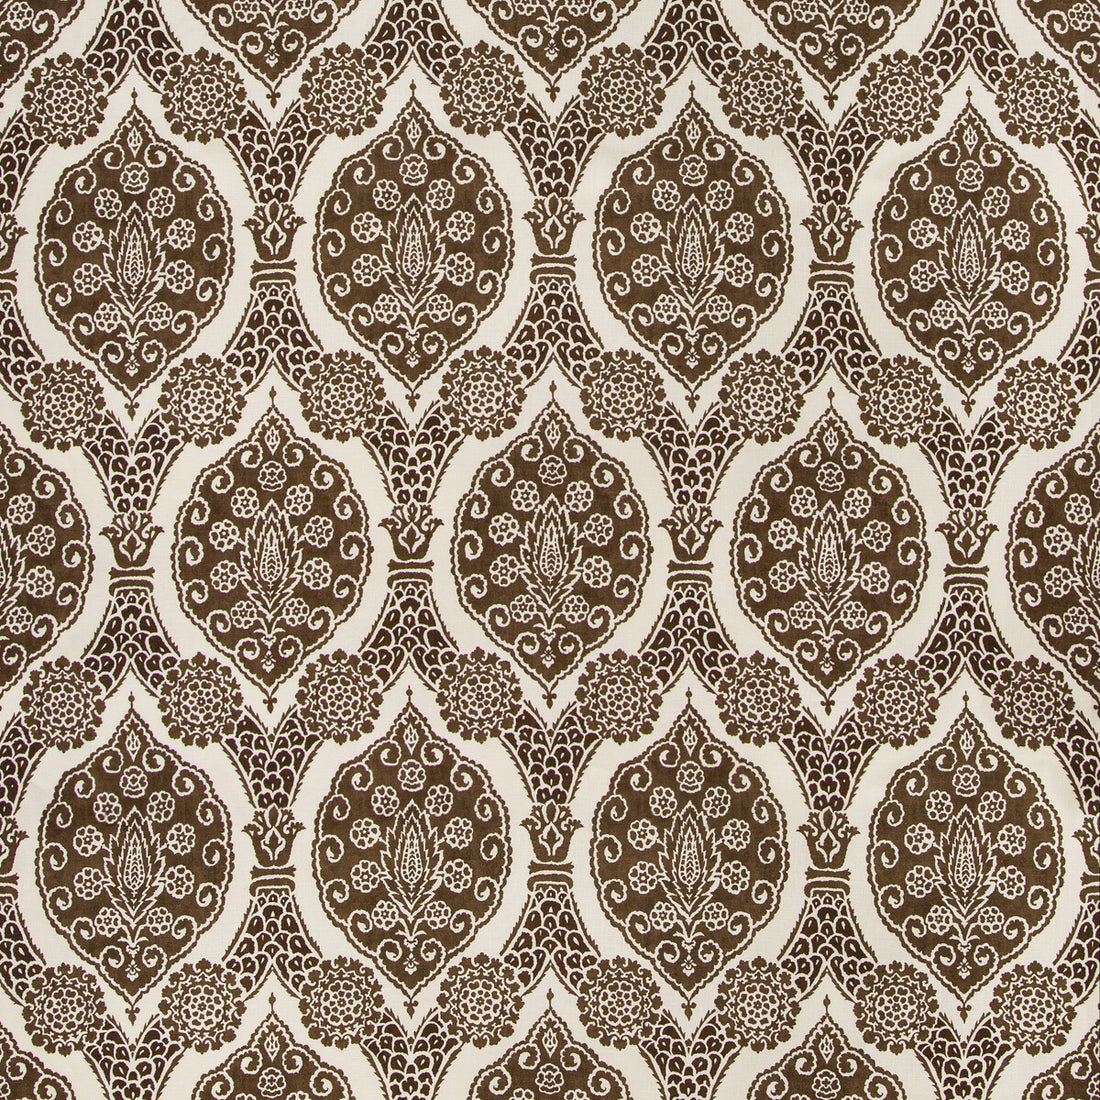 Sufera Print fabric in chocolate color - pattern 8020103.6.0 - by Brunschwig &amp; Fils in the Grand Bazaar collection